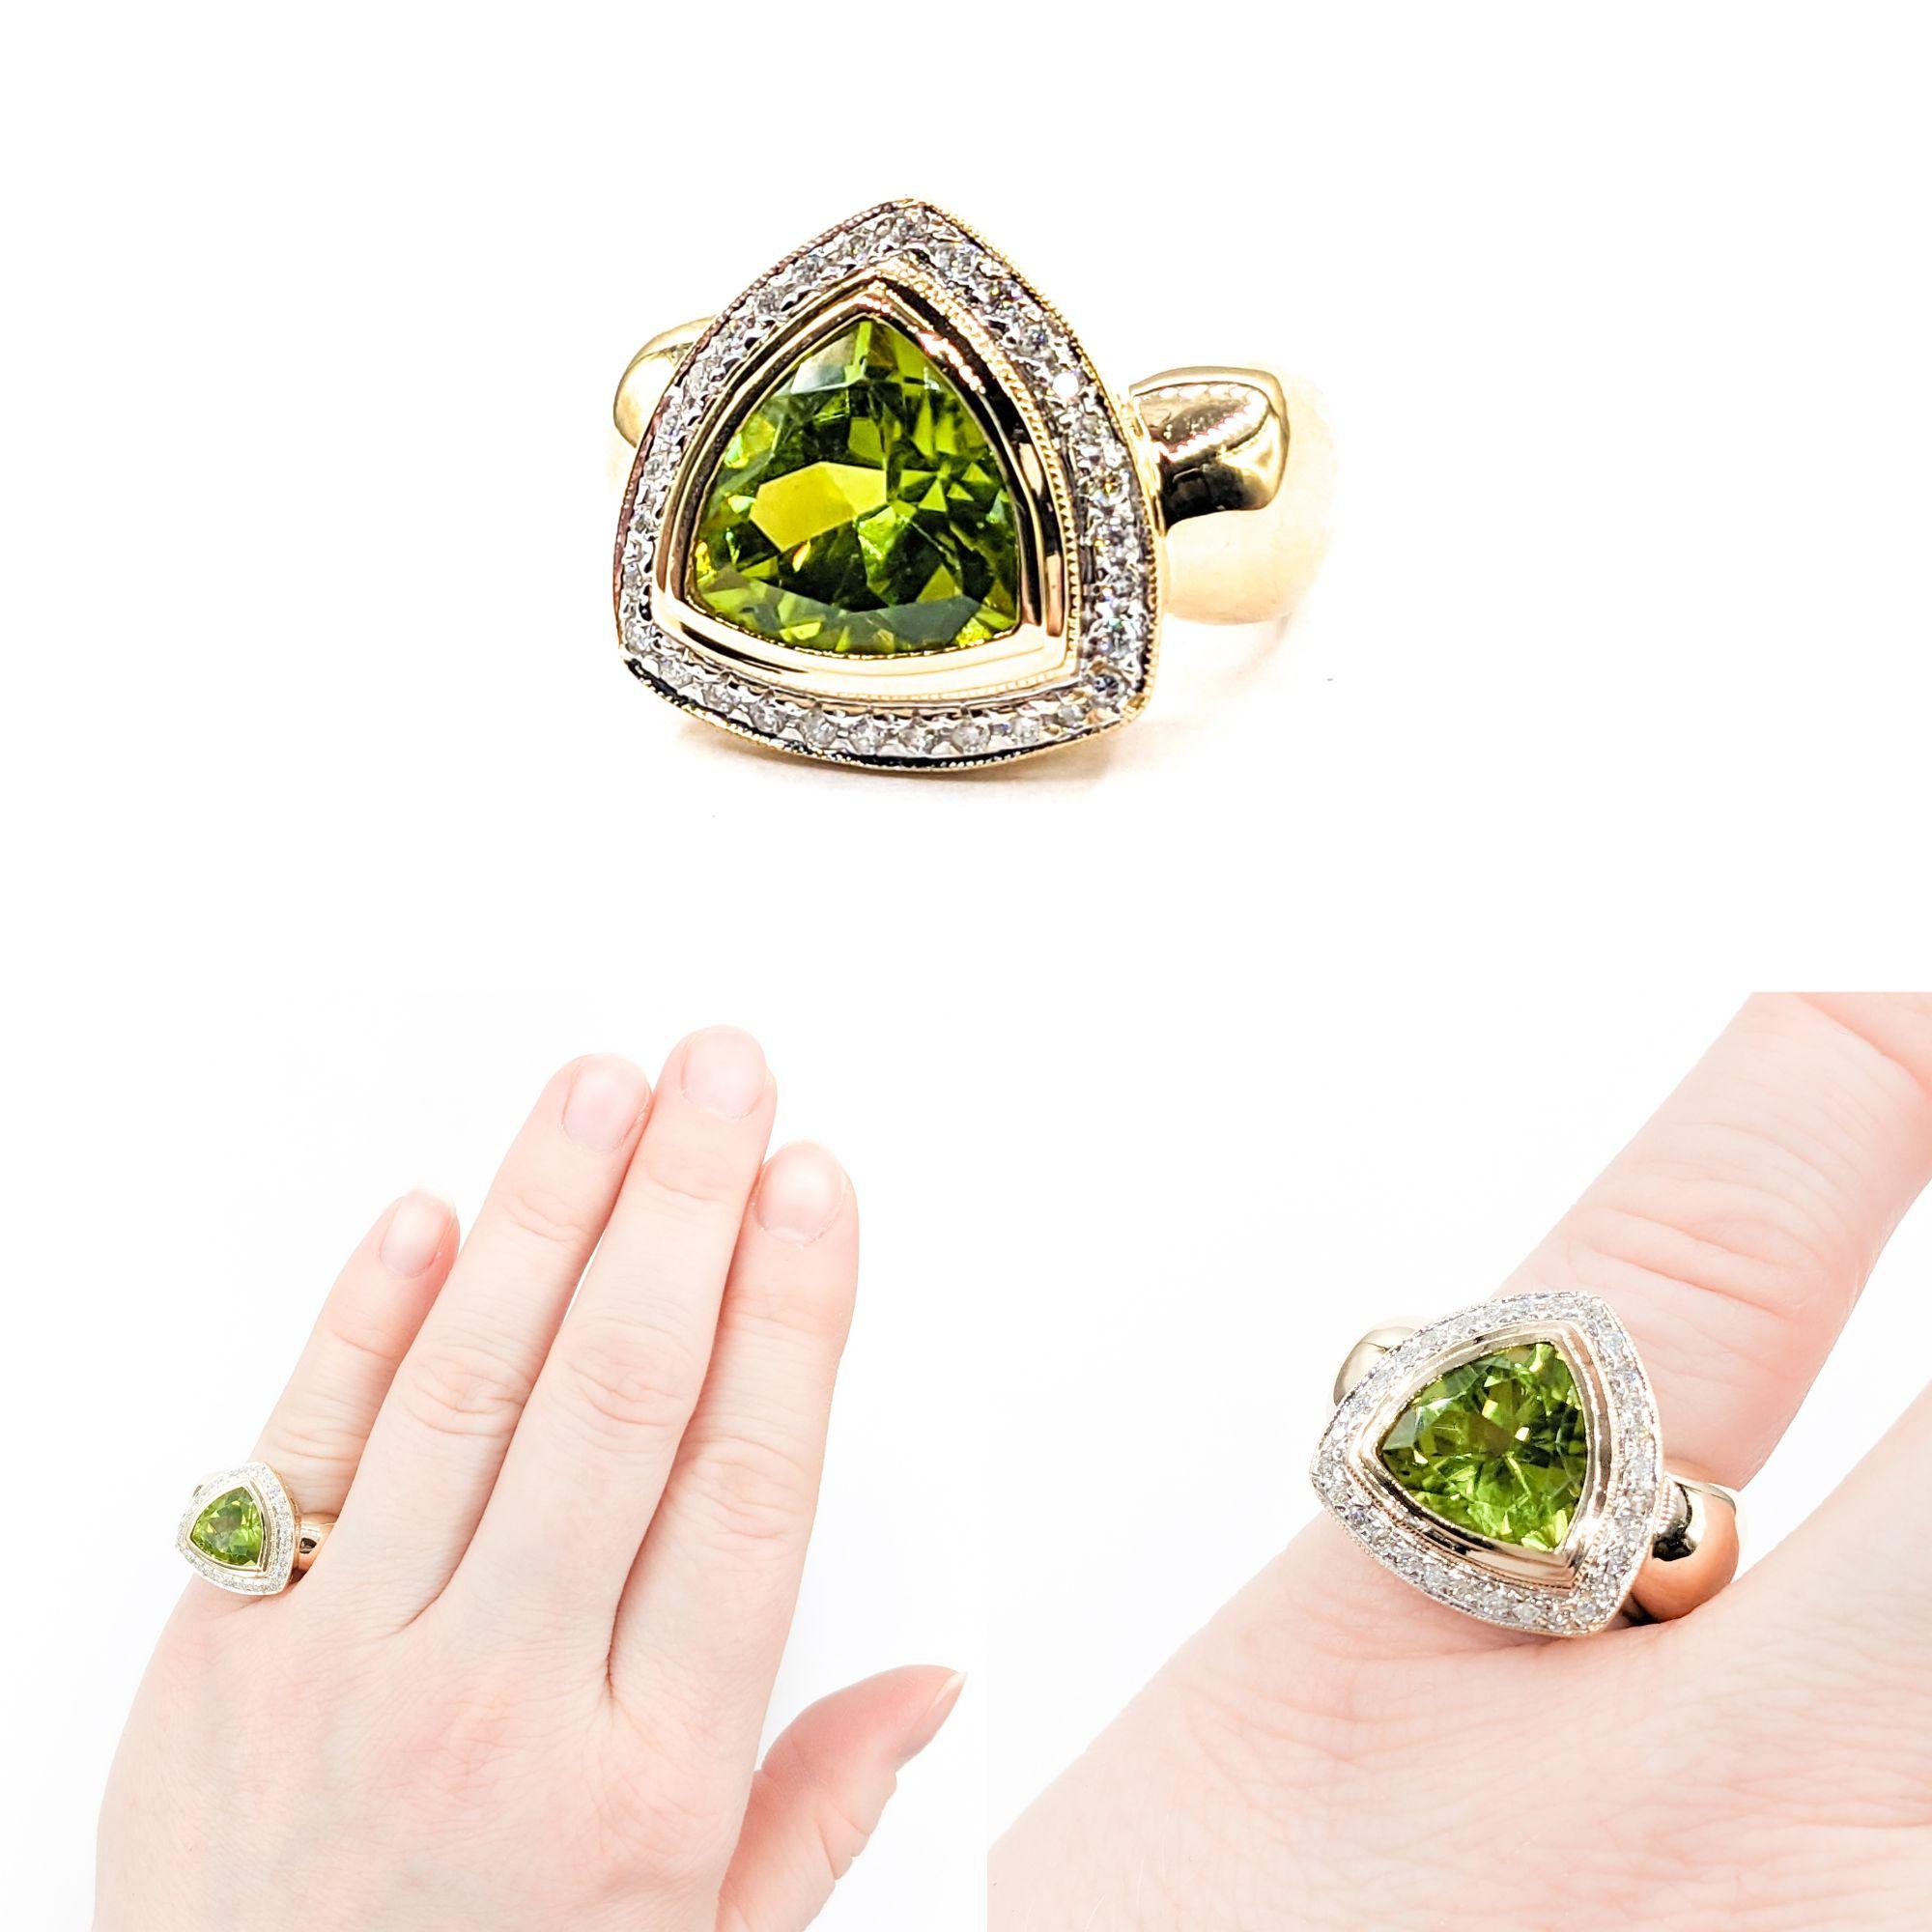 Halo 3.25ct Peridot & Diamonds Ring In Yellow Gold


This magnificent gemstone fashion ring is expertly crafted in 14kt yellow gold, featuring a radiant 3.25ct peridot centerpiece that captivates with its vibrant green hue. Encircled by a halo of